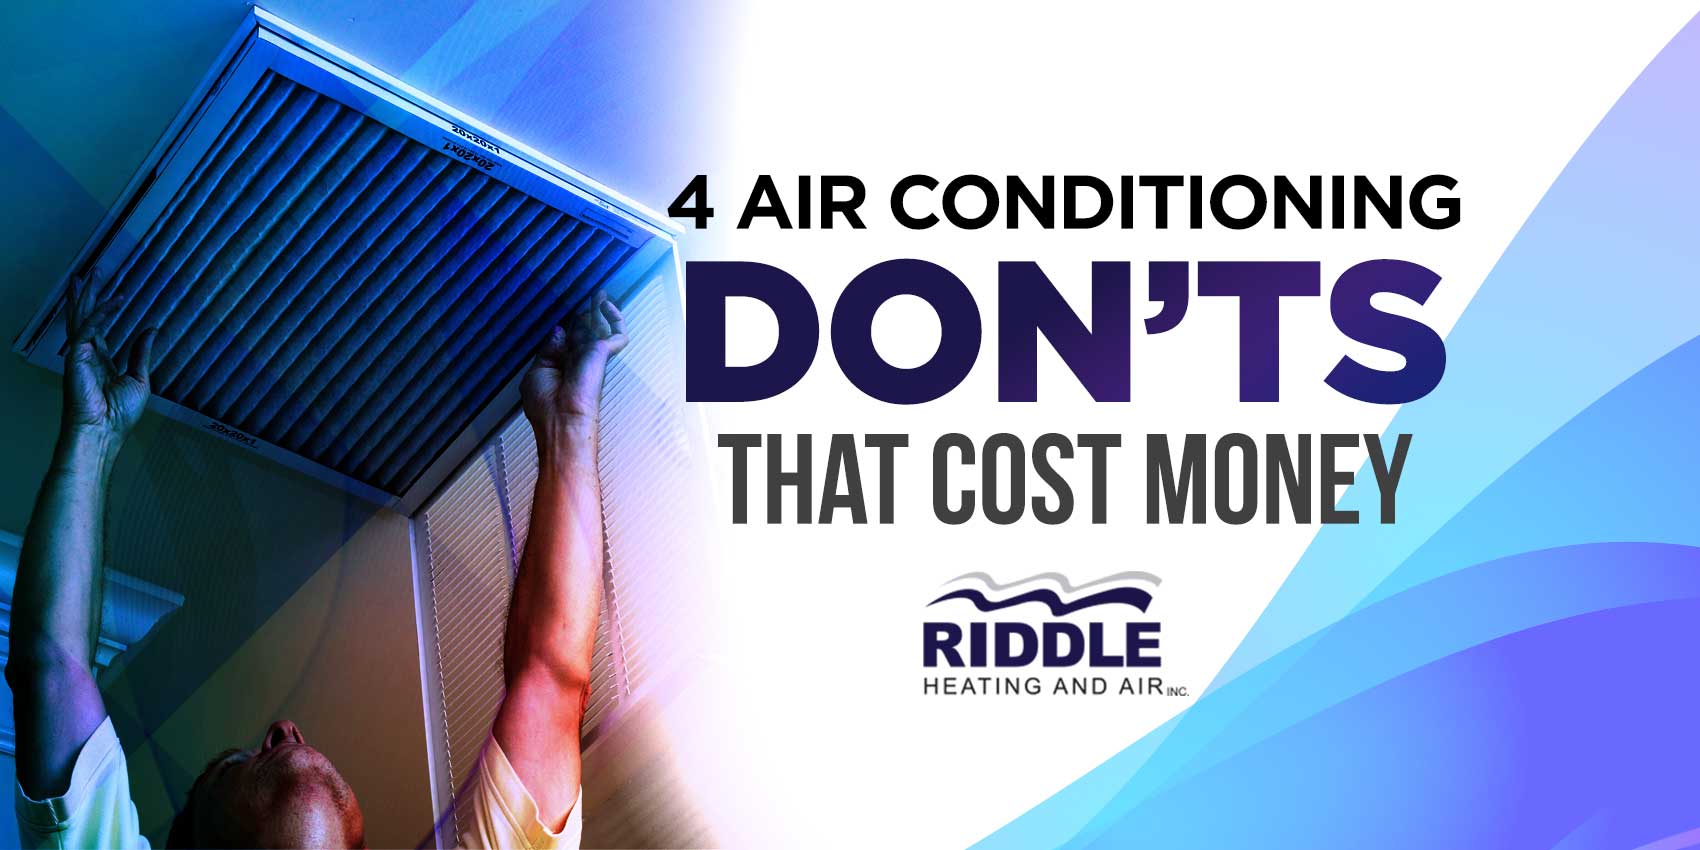 4 Air Conditioning DON'TS That Cost Money